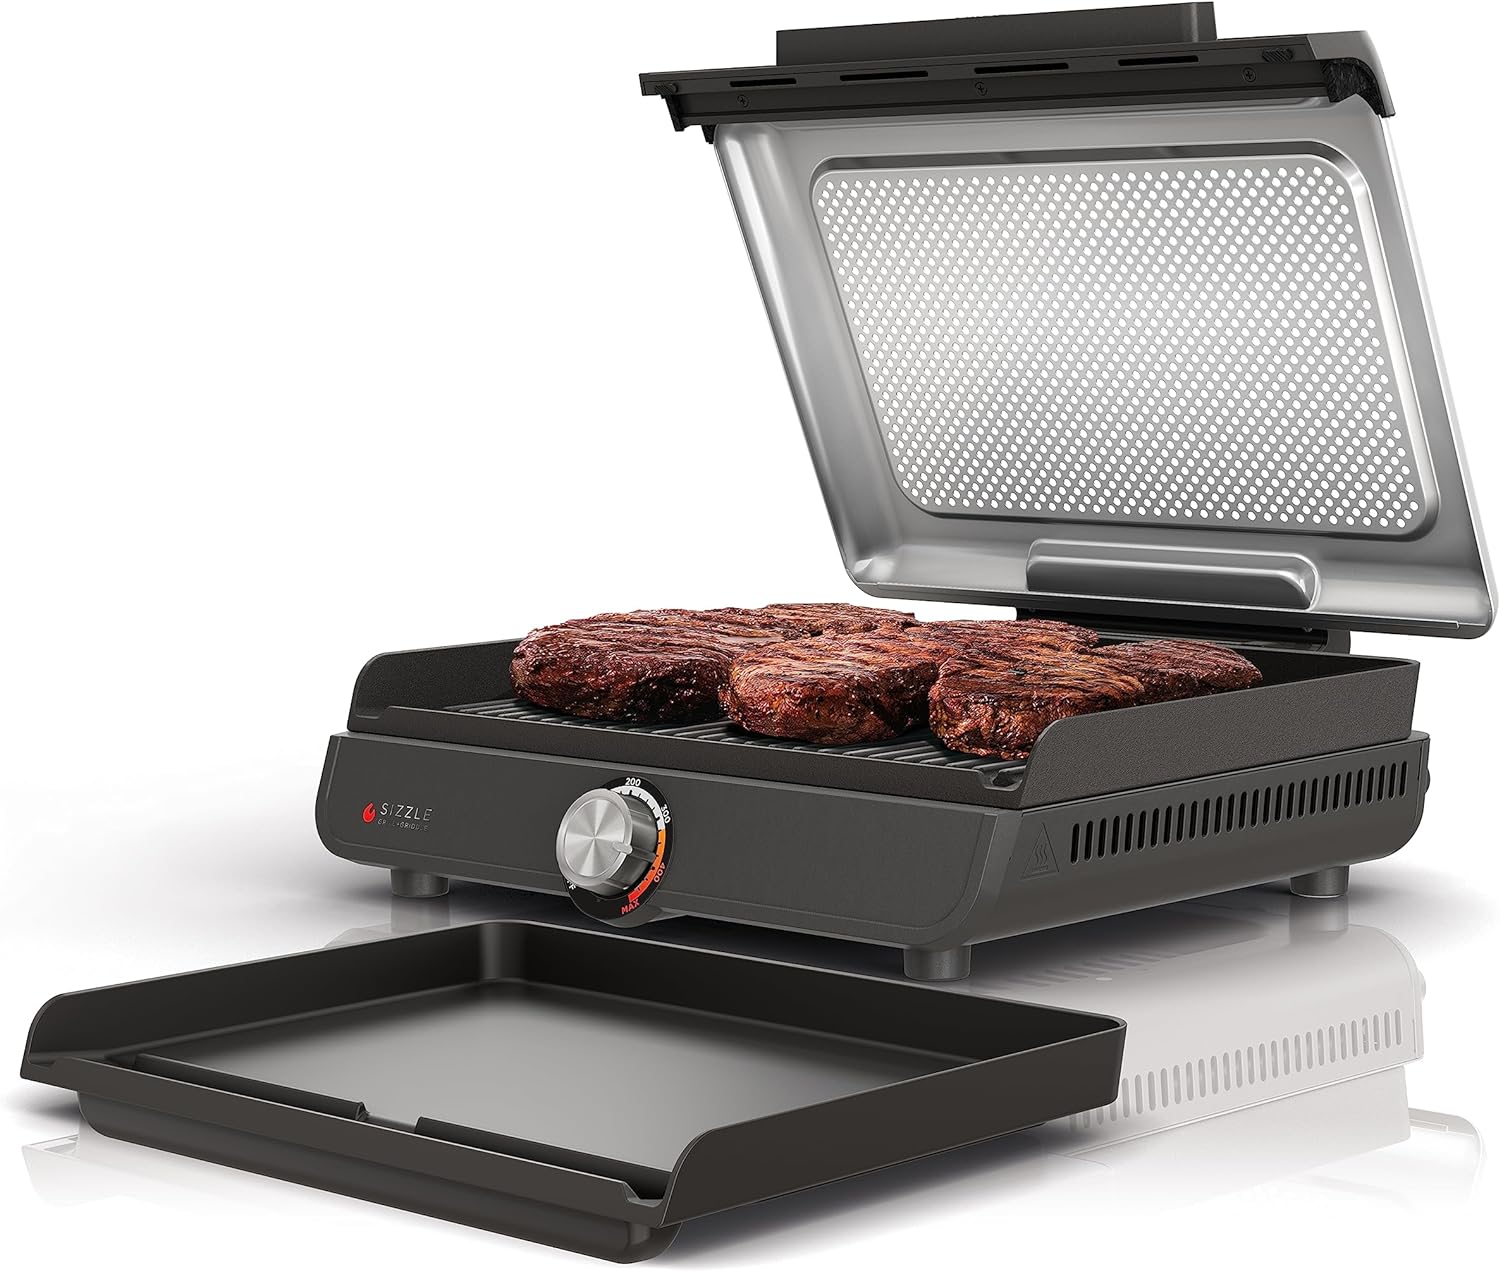 GR101 Sizzle Smokeless Indoor Grill and Griddle - Interchangeable Nonstick Plates